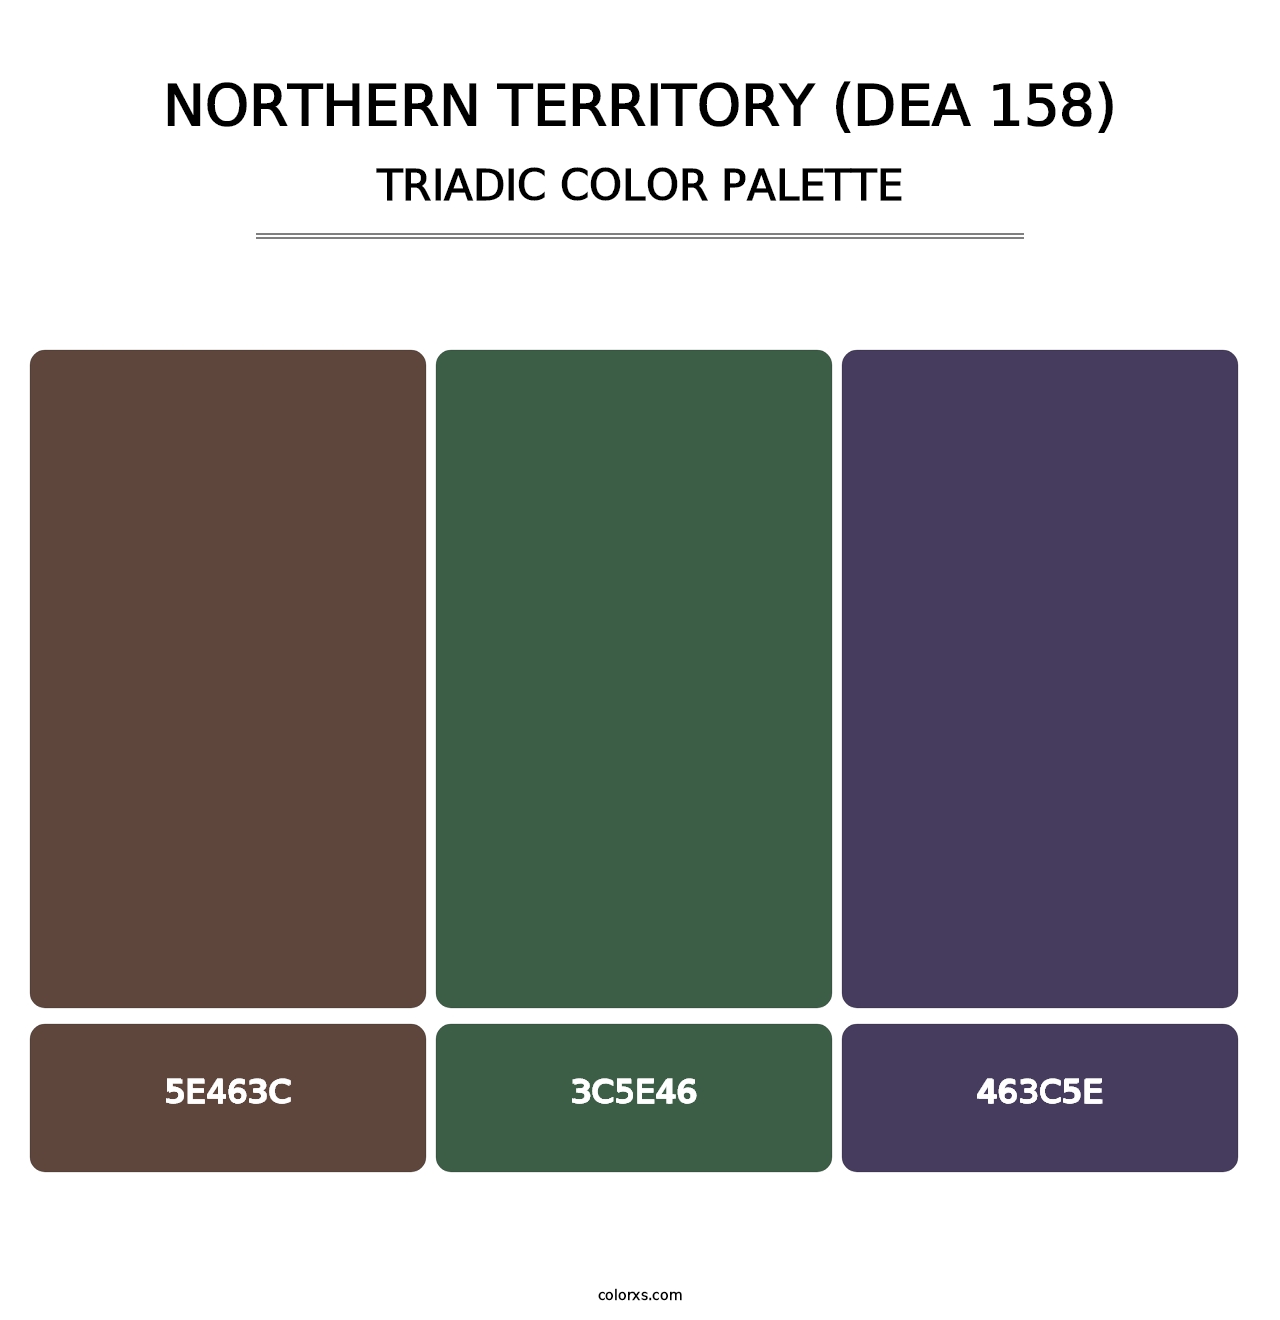 Northern Territory (DEA 158) - Triadic Color Palette